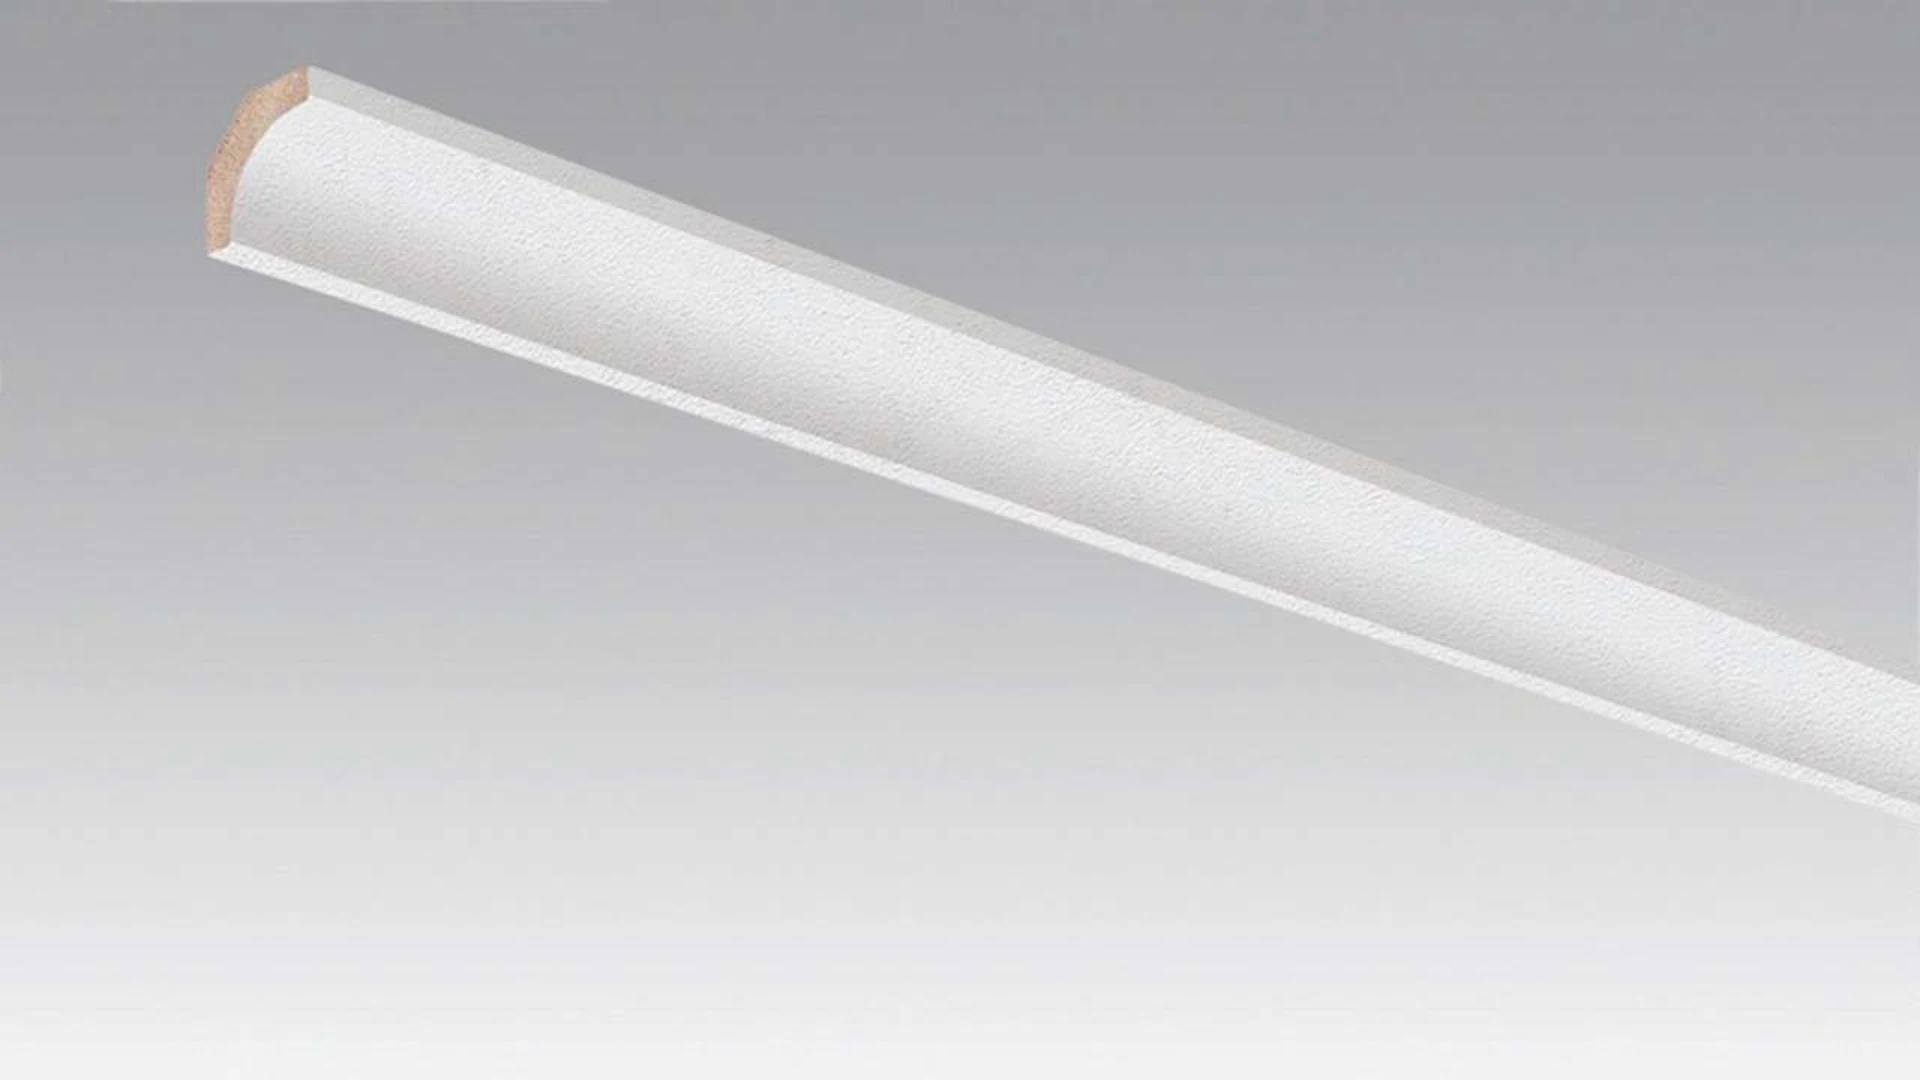 MEISTER White Cloud 4202 coved moulding - 2380 x 22 x 22 mm (200034-2380-04202)